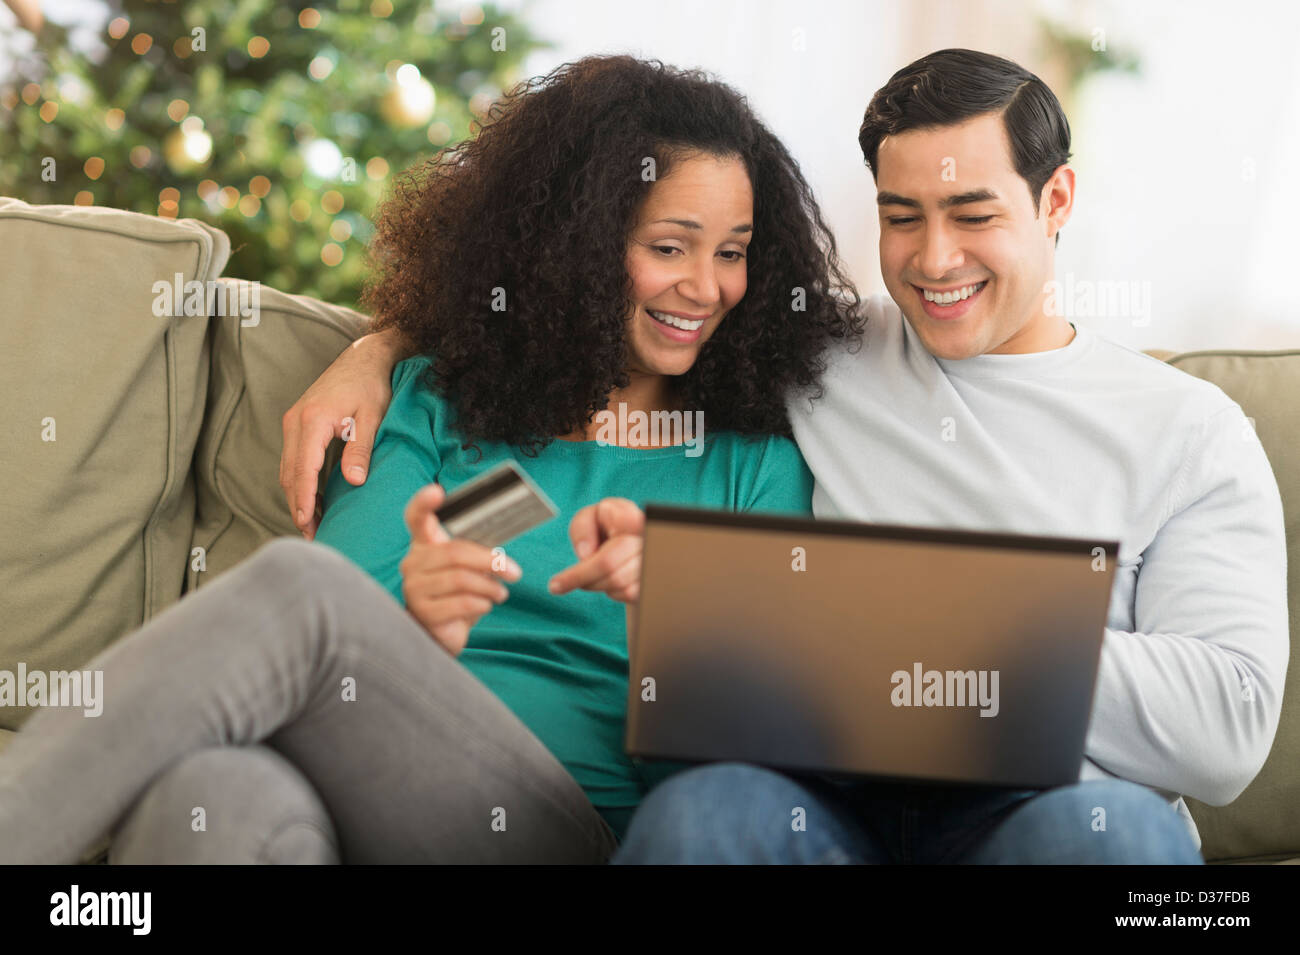 USA, New Jersey, Jersey City, Couple using laptop for online shopping Stock Photo